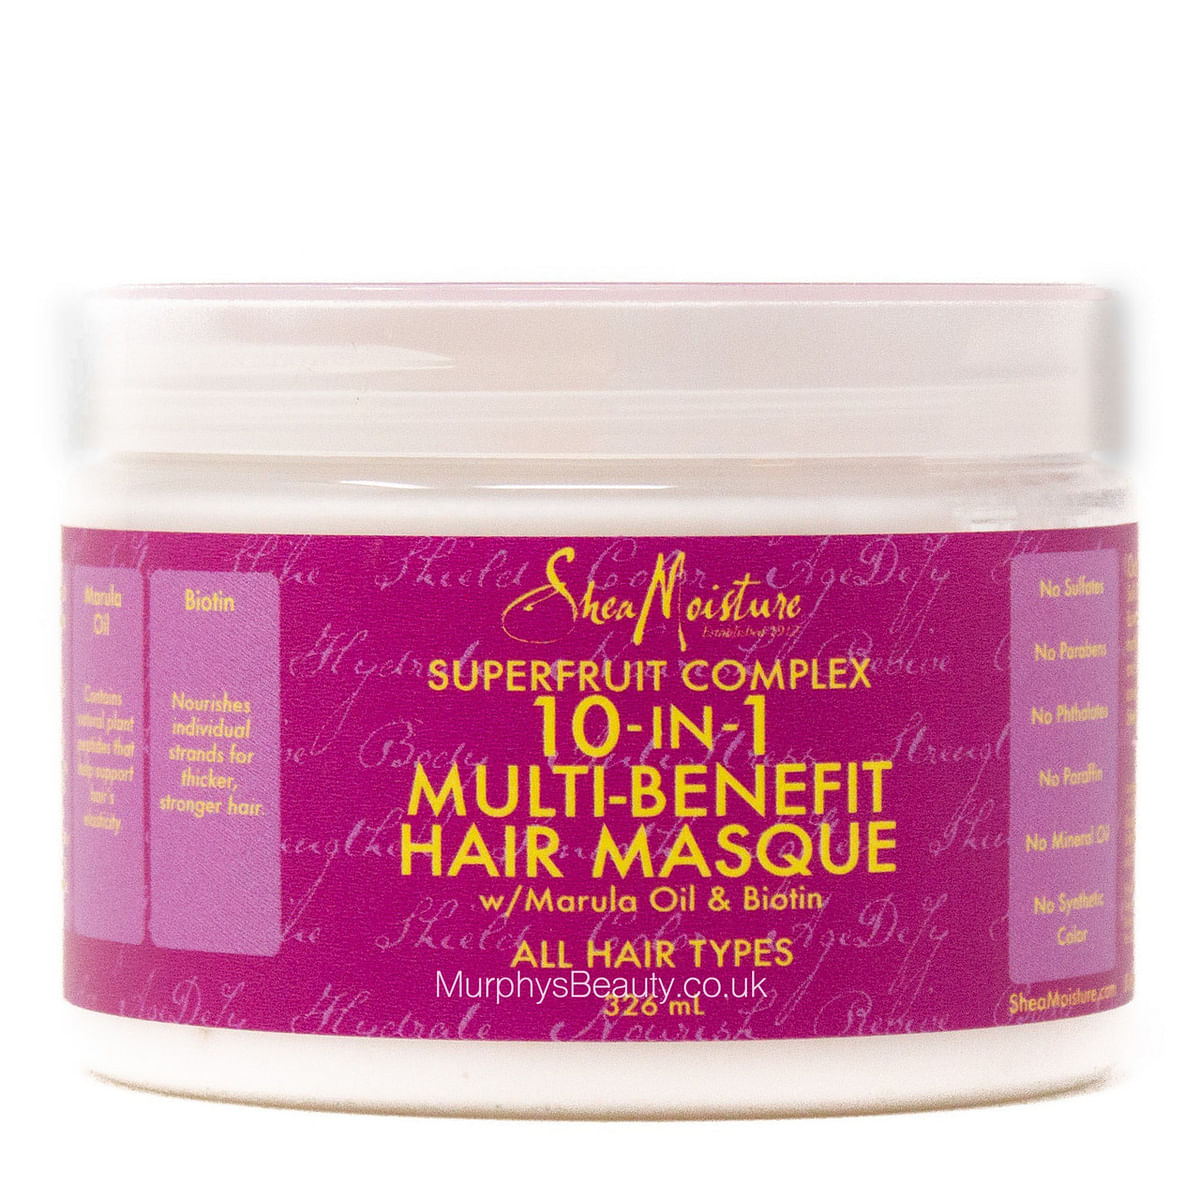 Hair Masque Shea Moisture SuperFruit Complex 10-IN-1 Renewal System  12oz